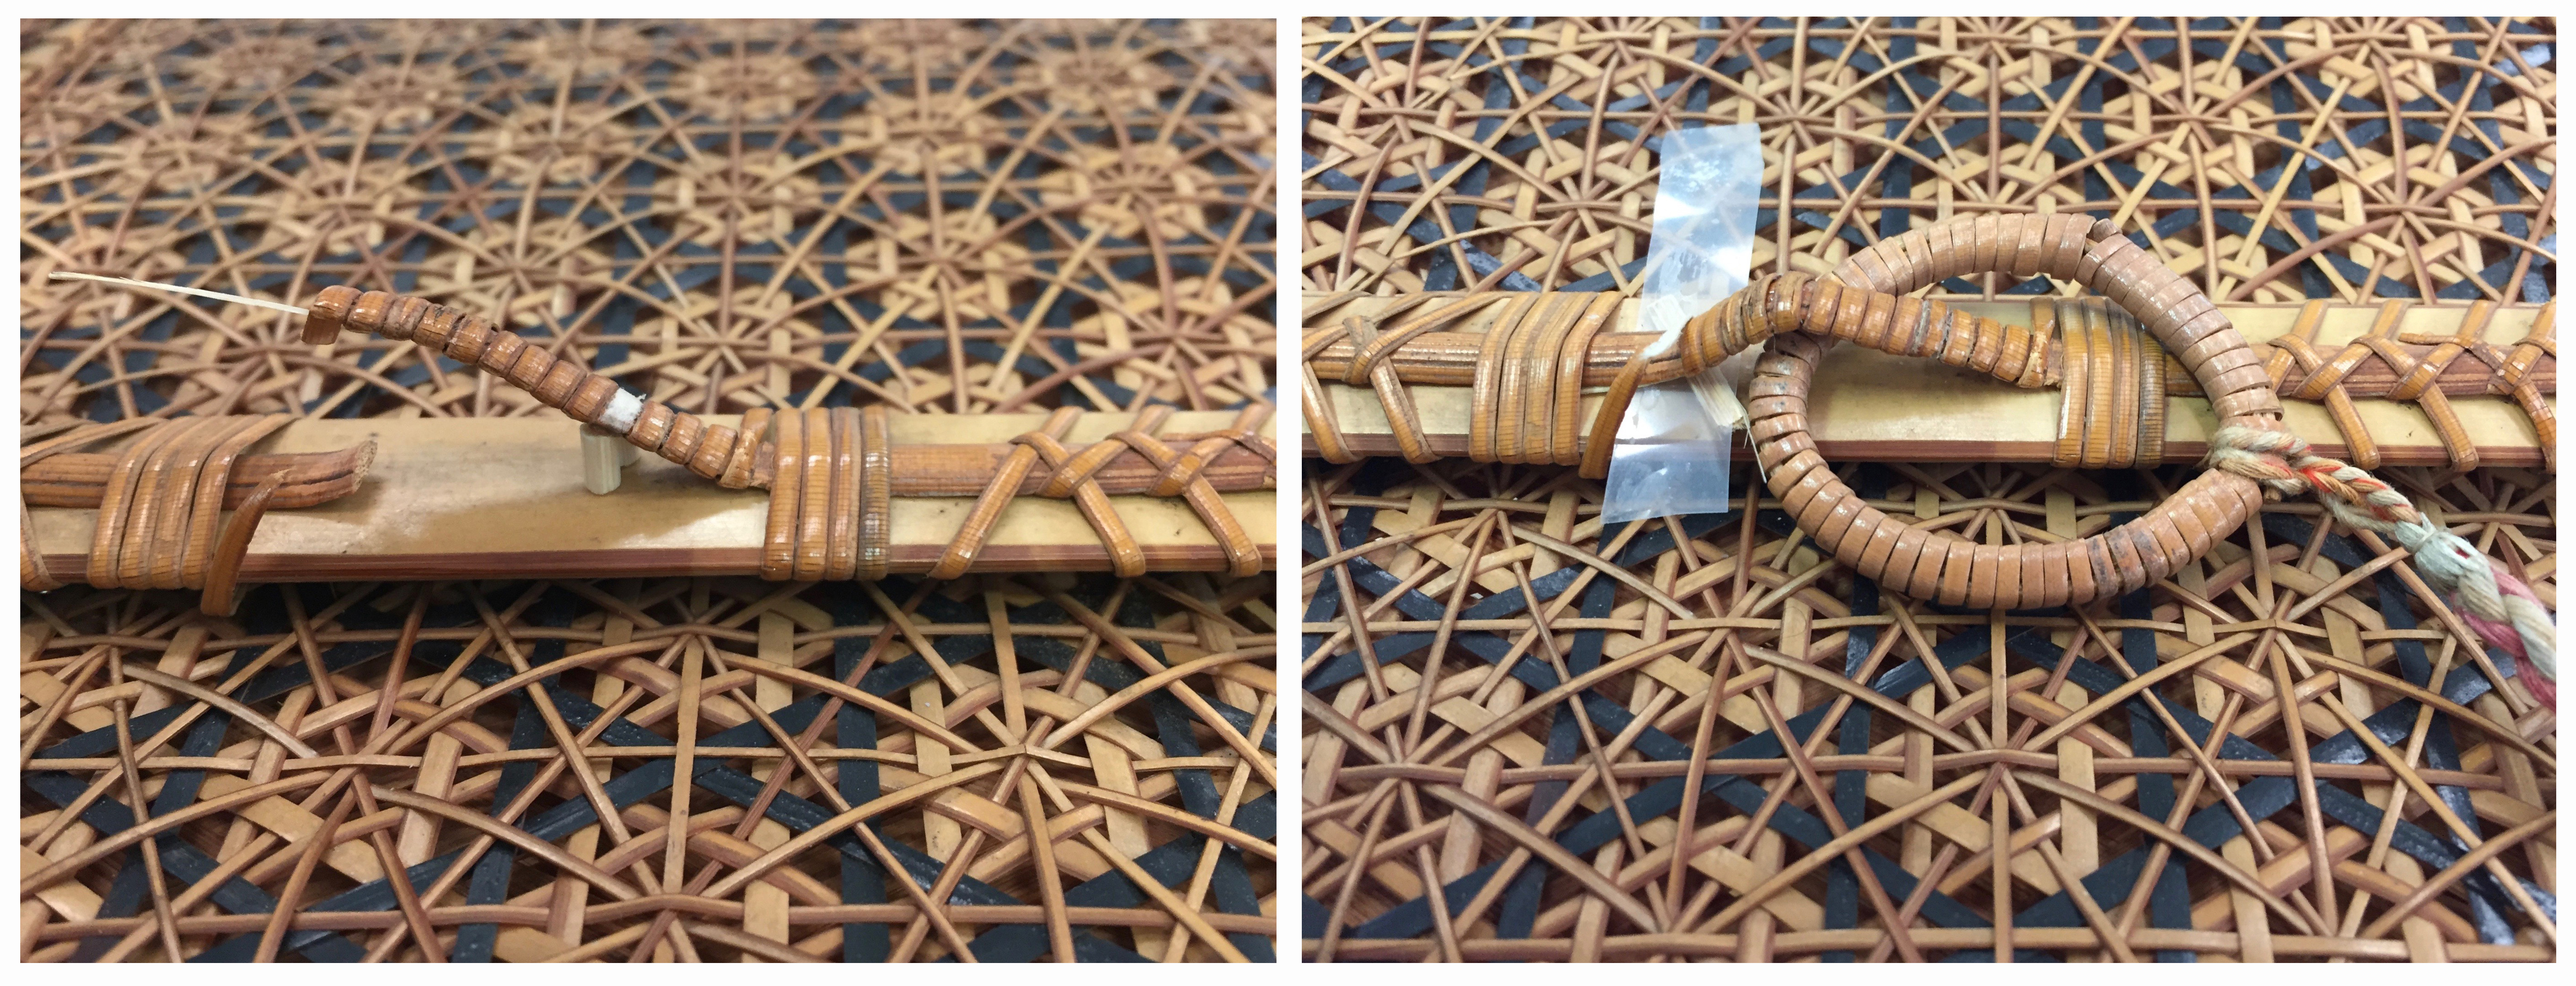 Left: Broken loop realigned using a splint, on background of woven hexagonal pattern. Right: Bamboo ring on end of silk tie attached through bamboo loop with strip of Japanese tissue visible to repair break in outer bamboo wrapping, on background of woven hexagonal pattern.